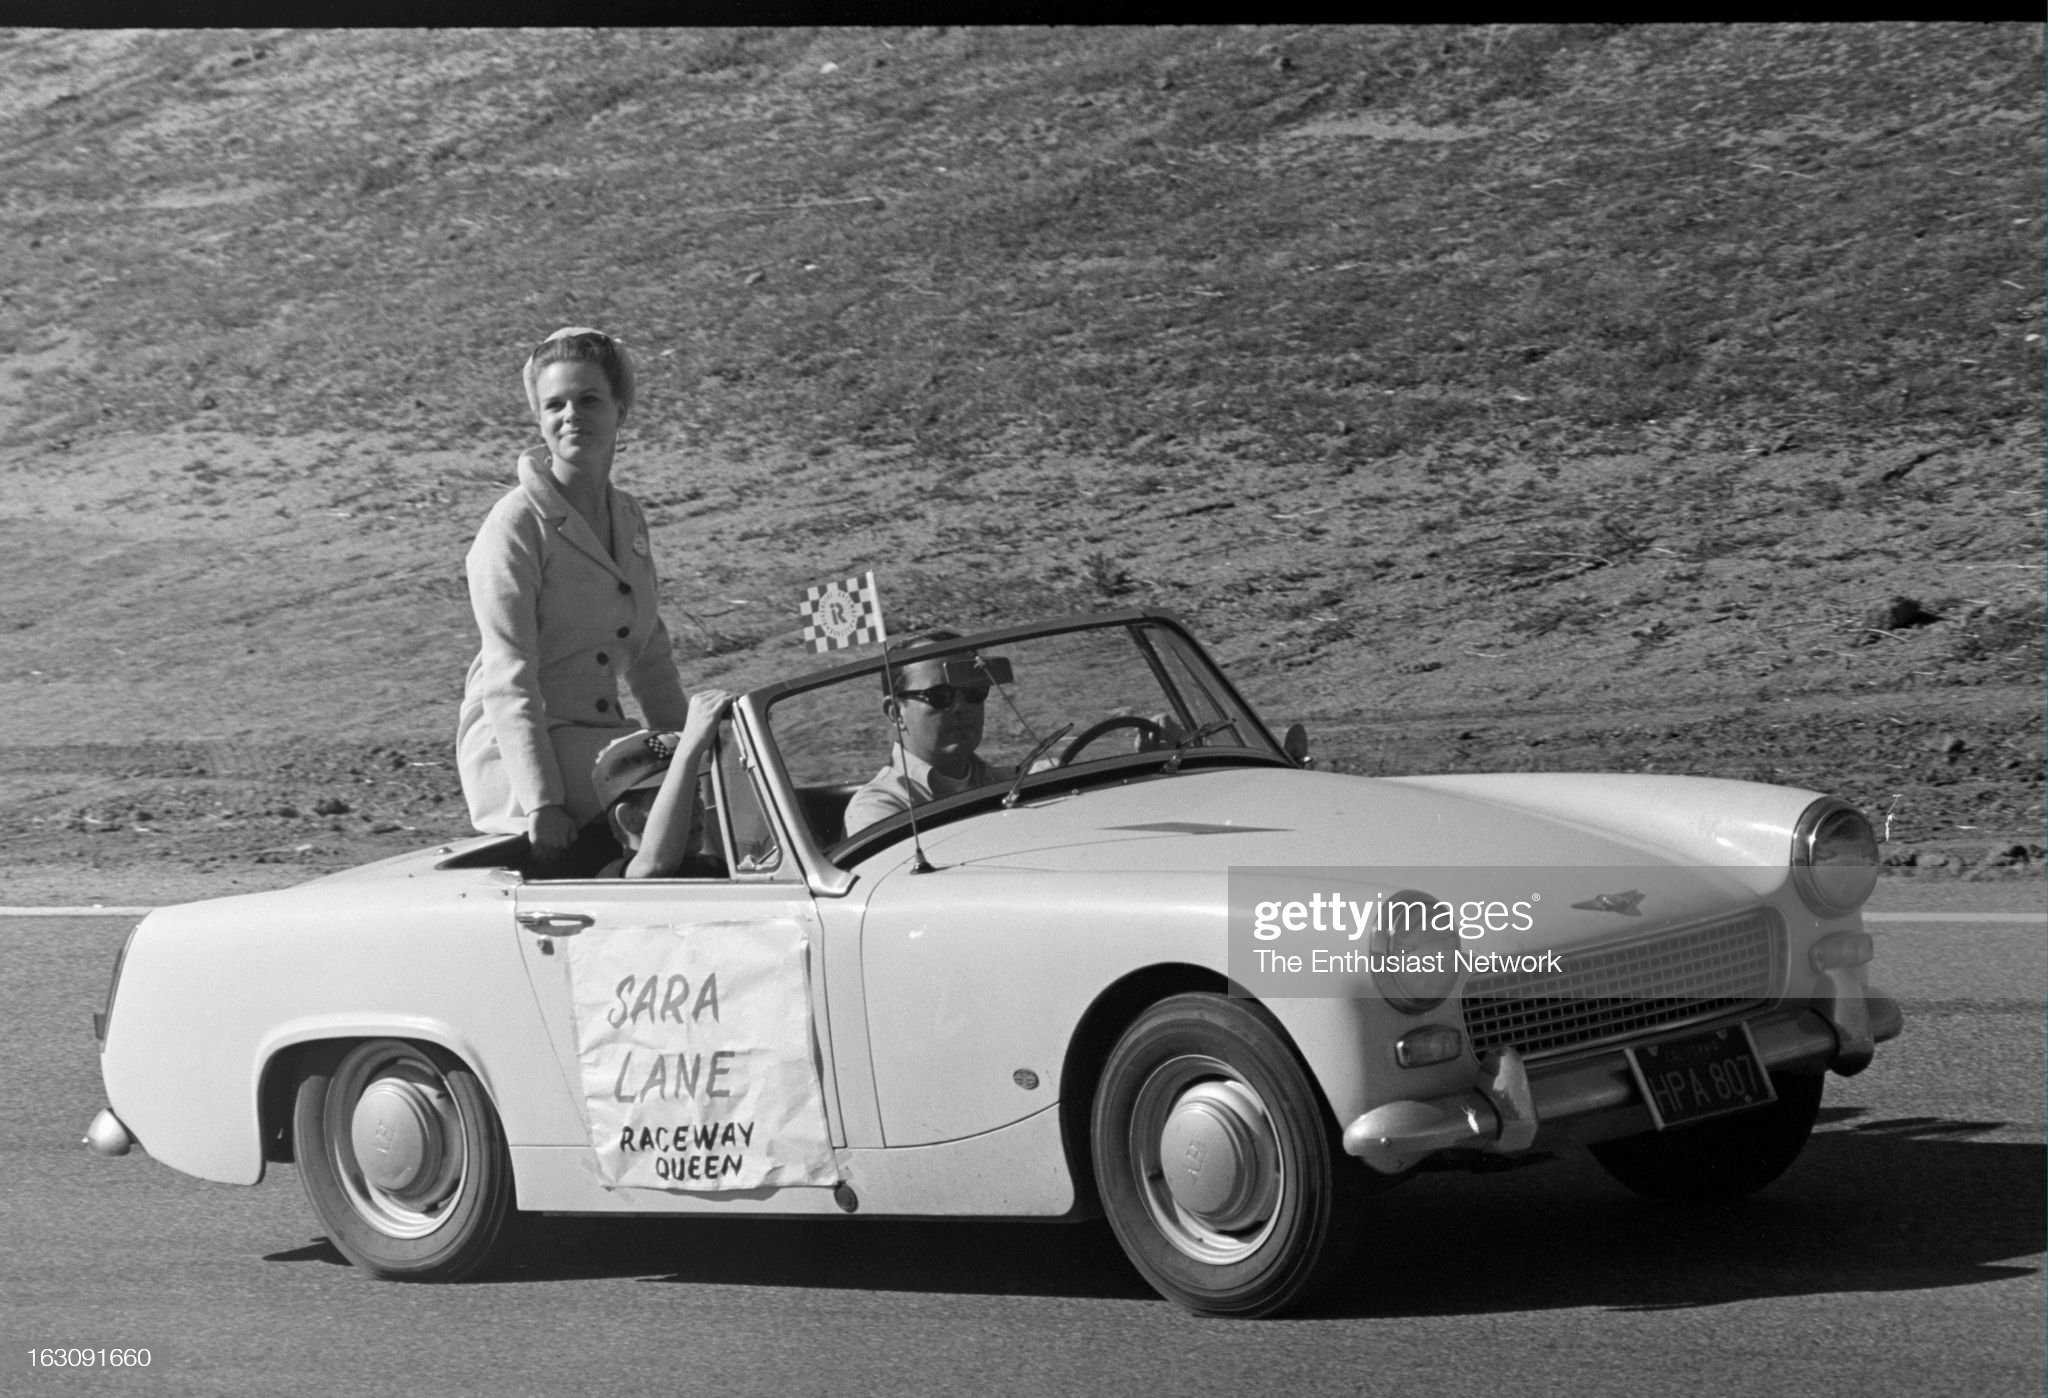 United States, January 22, 1968, Motor Trend 500, Riverside, NASCAR. Actress and Motor Trend 500 Race Queen Sara Lane goes around the track on a parade lap in the back of an Austin Healey Sprite. 